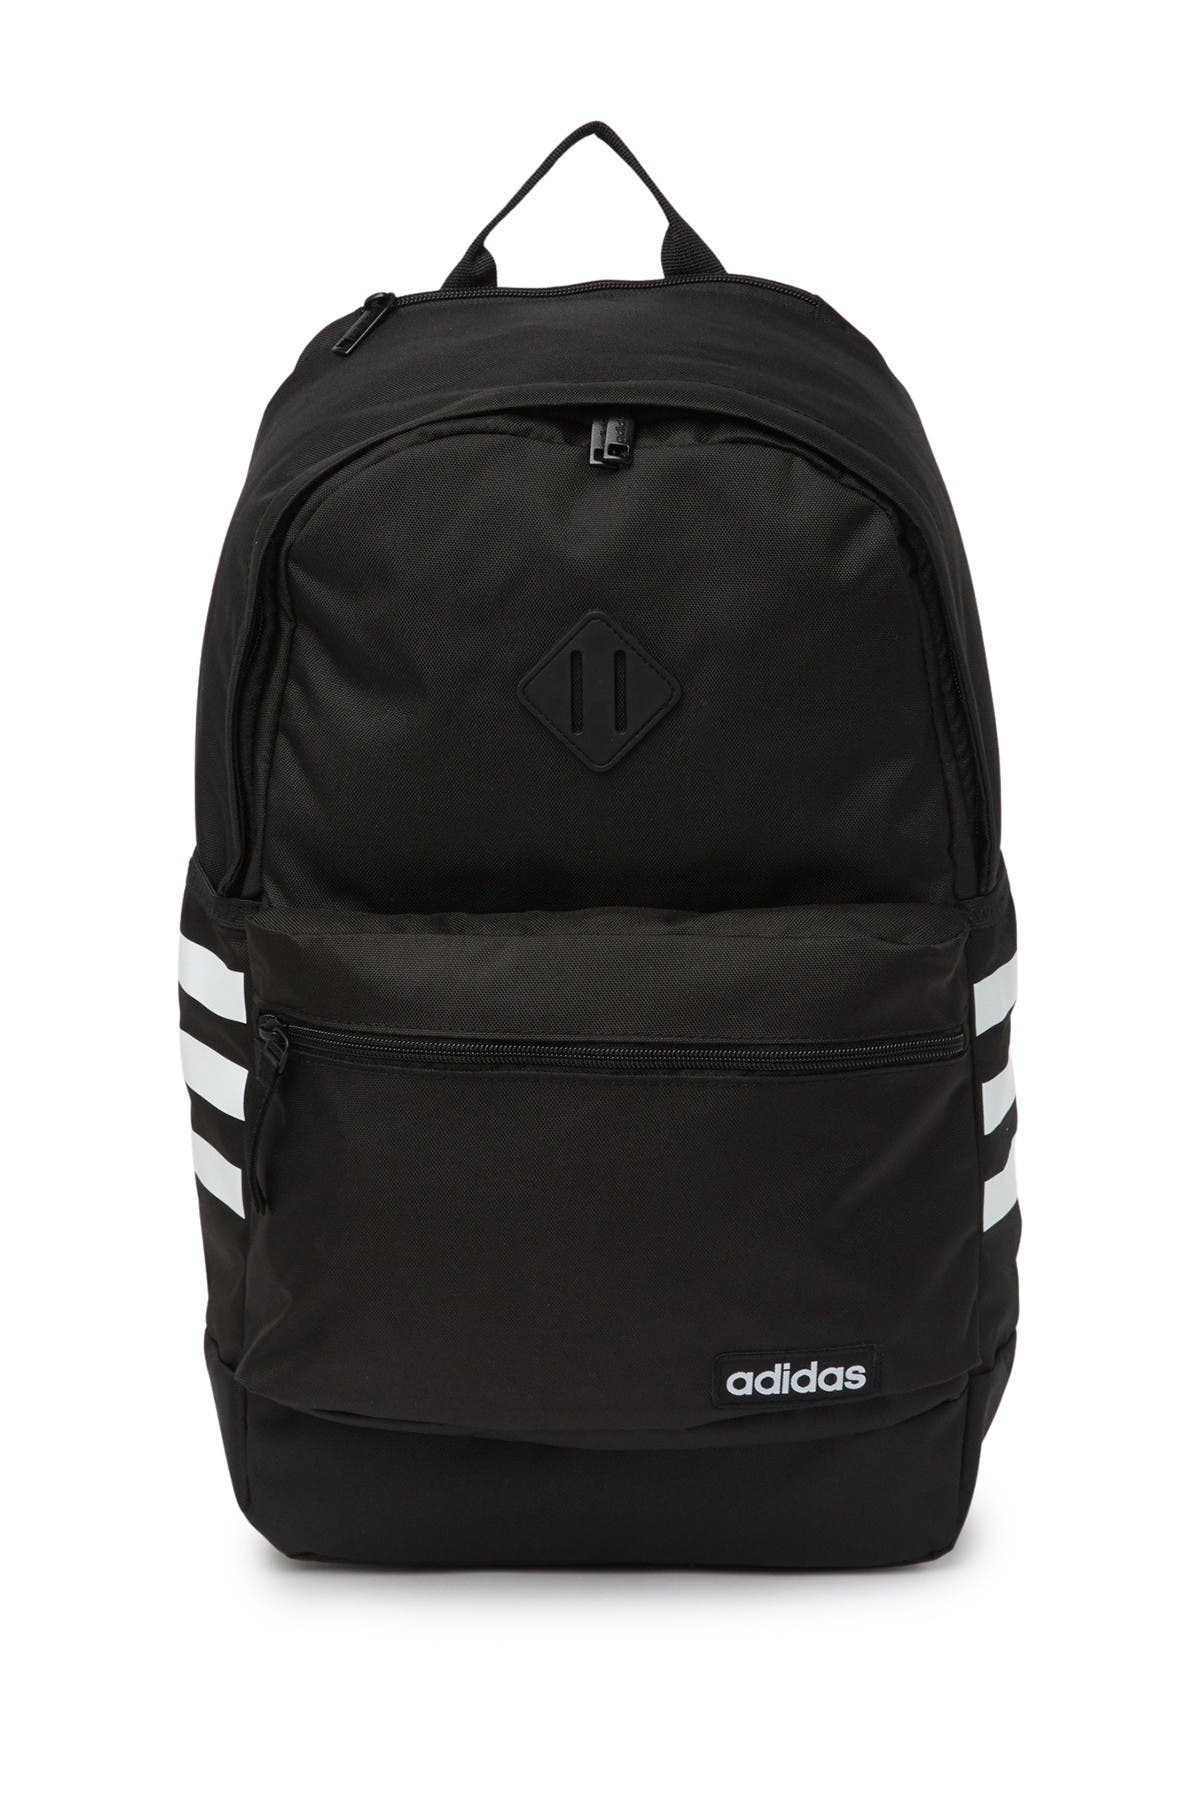 adidas backpack classic 3s